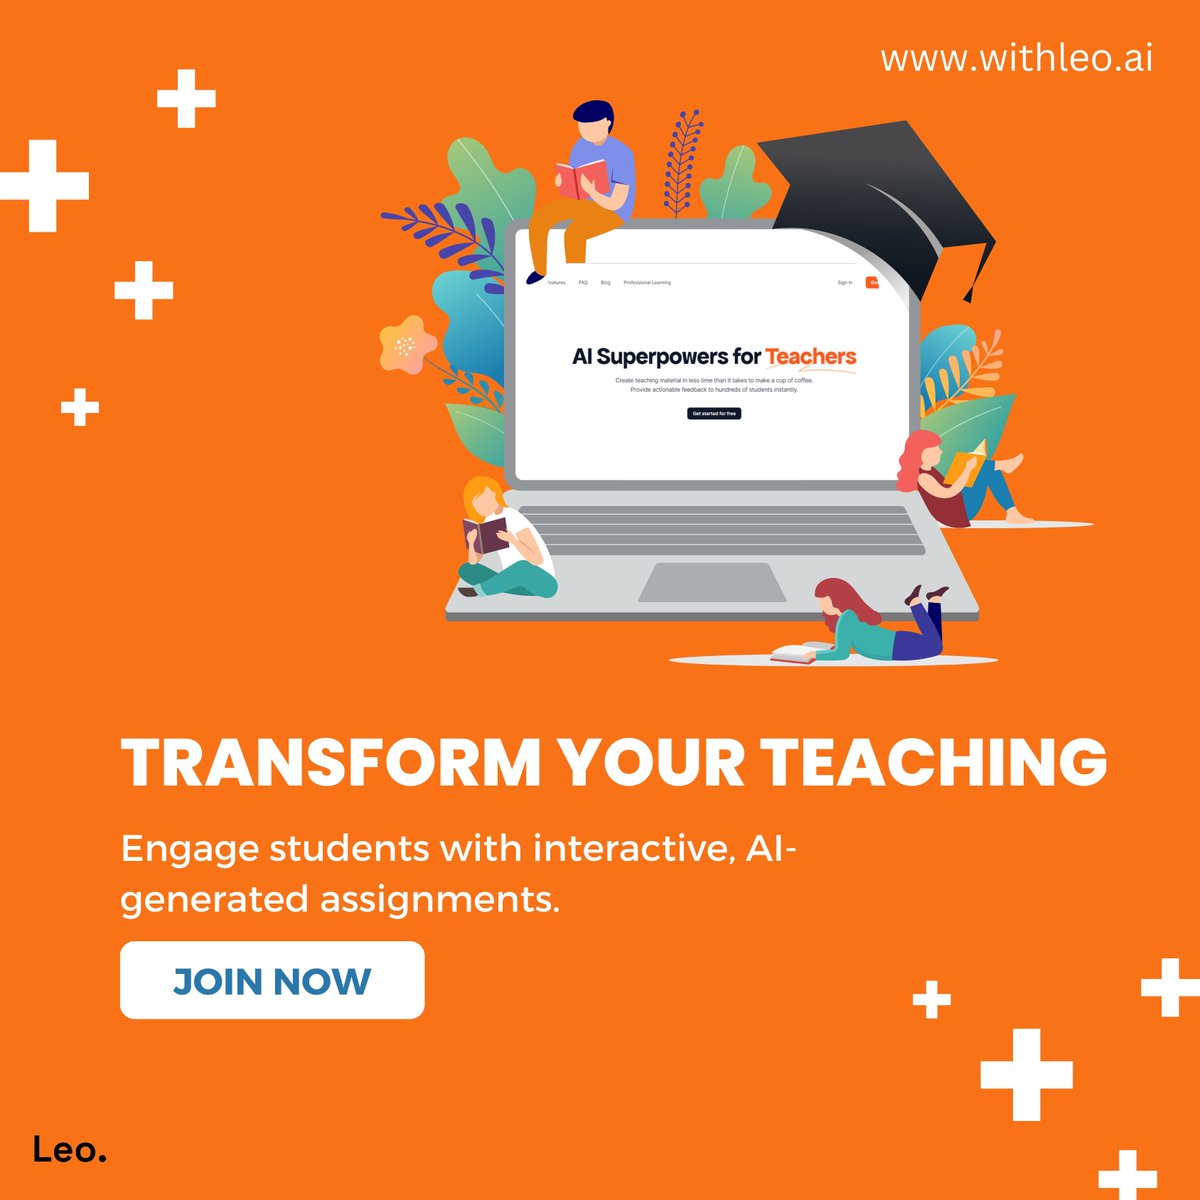 Enhance student engagement with Leo's interactive assignments featuring multimedia and real-world scenarios. Discover how Leo's AI can spark curiosity and active participation at withleo.ai #AI #edtech #education #teaching #AIinEducation #TeacherTools